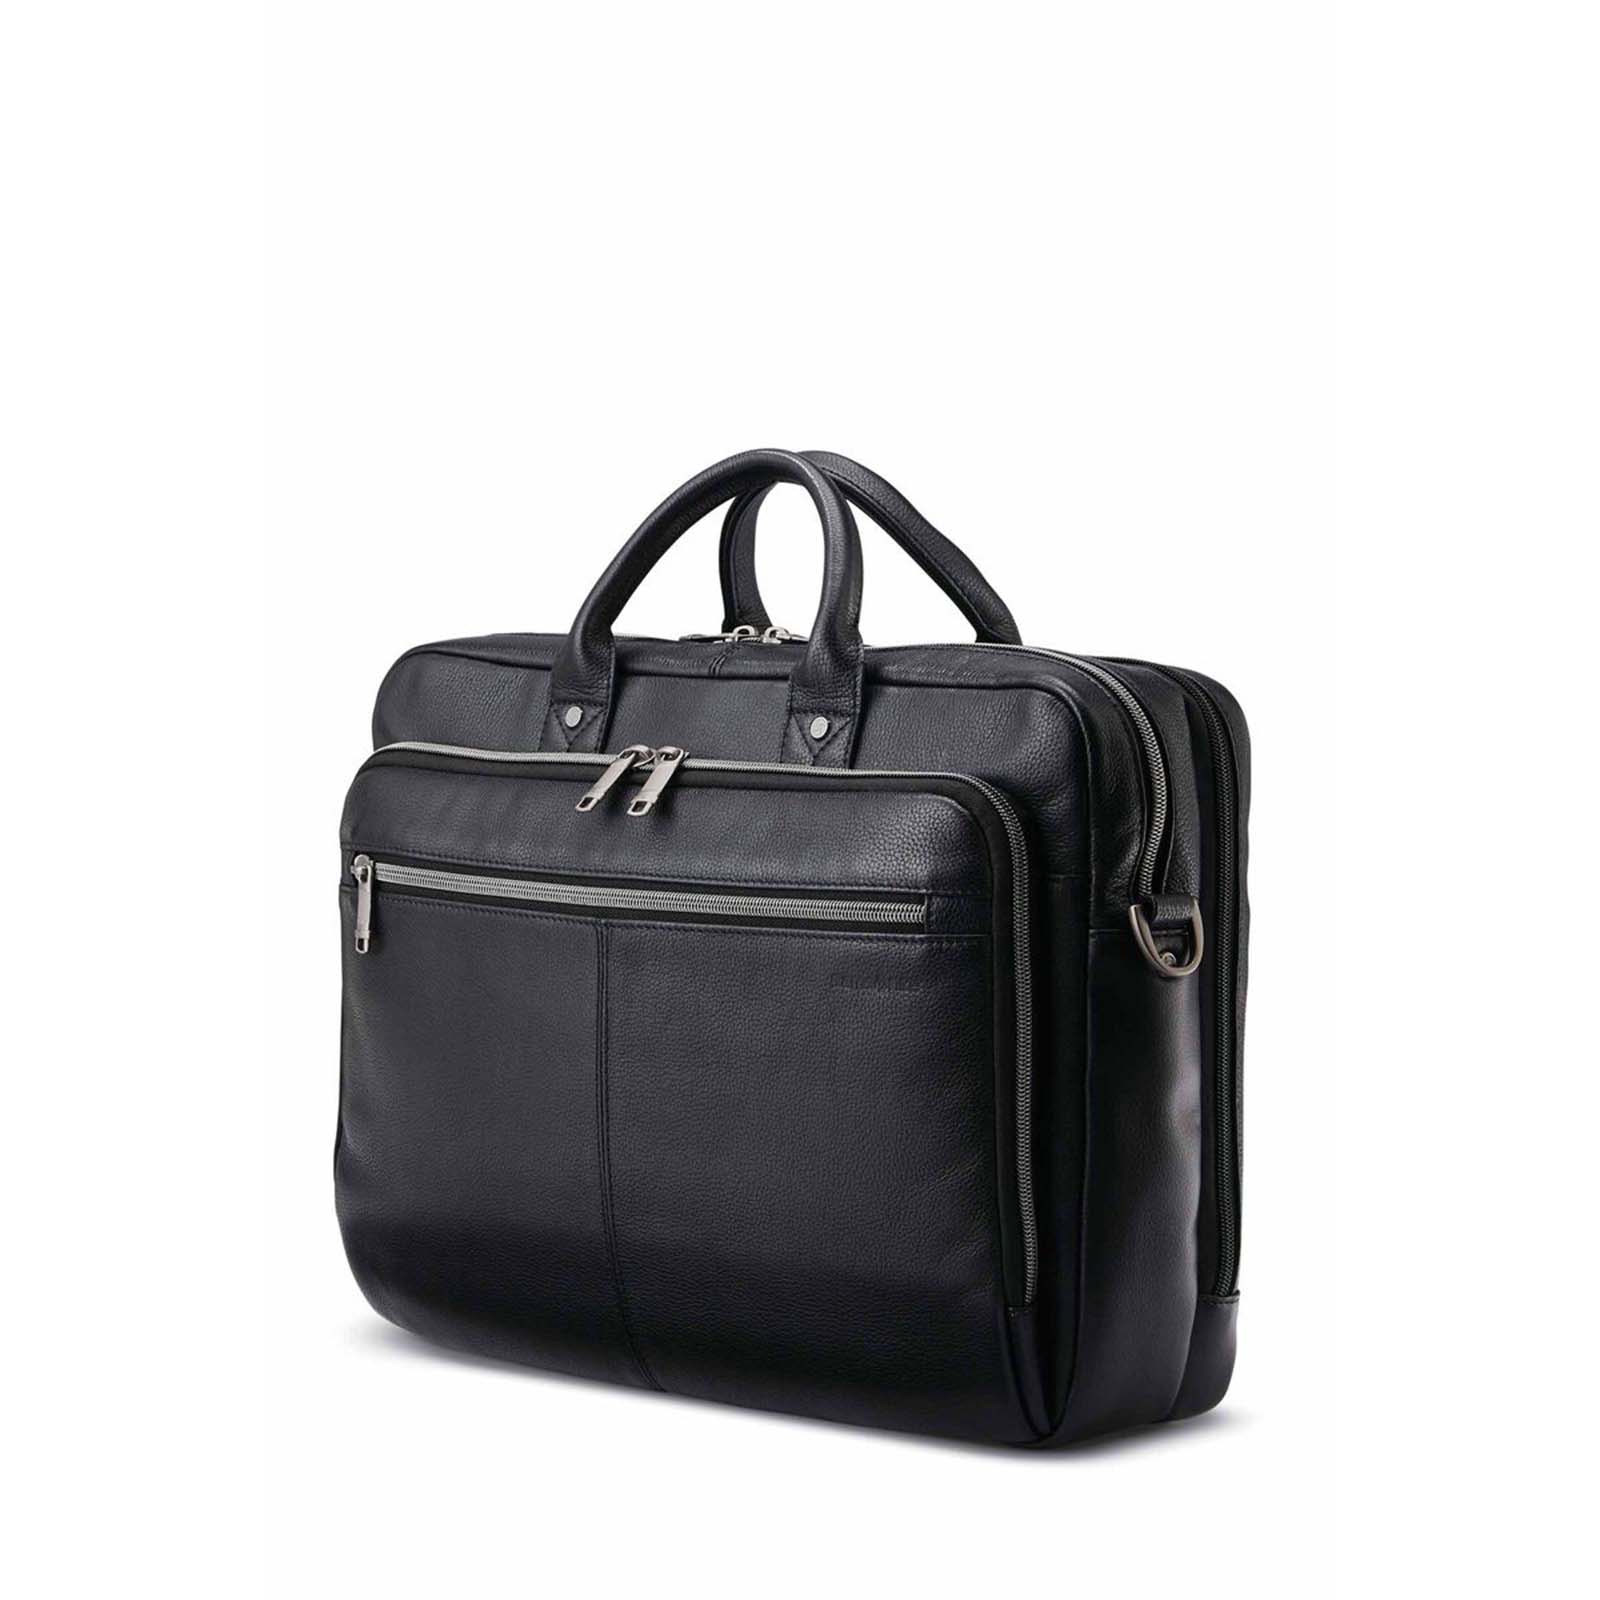 Samsonite-Classic-Leather-15-Inch-Top-Loader-Black-Front